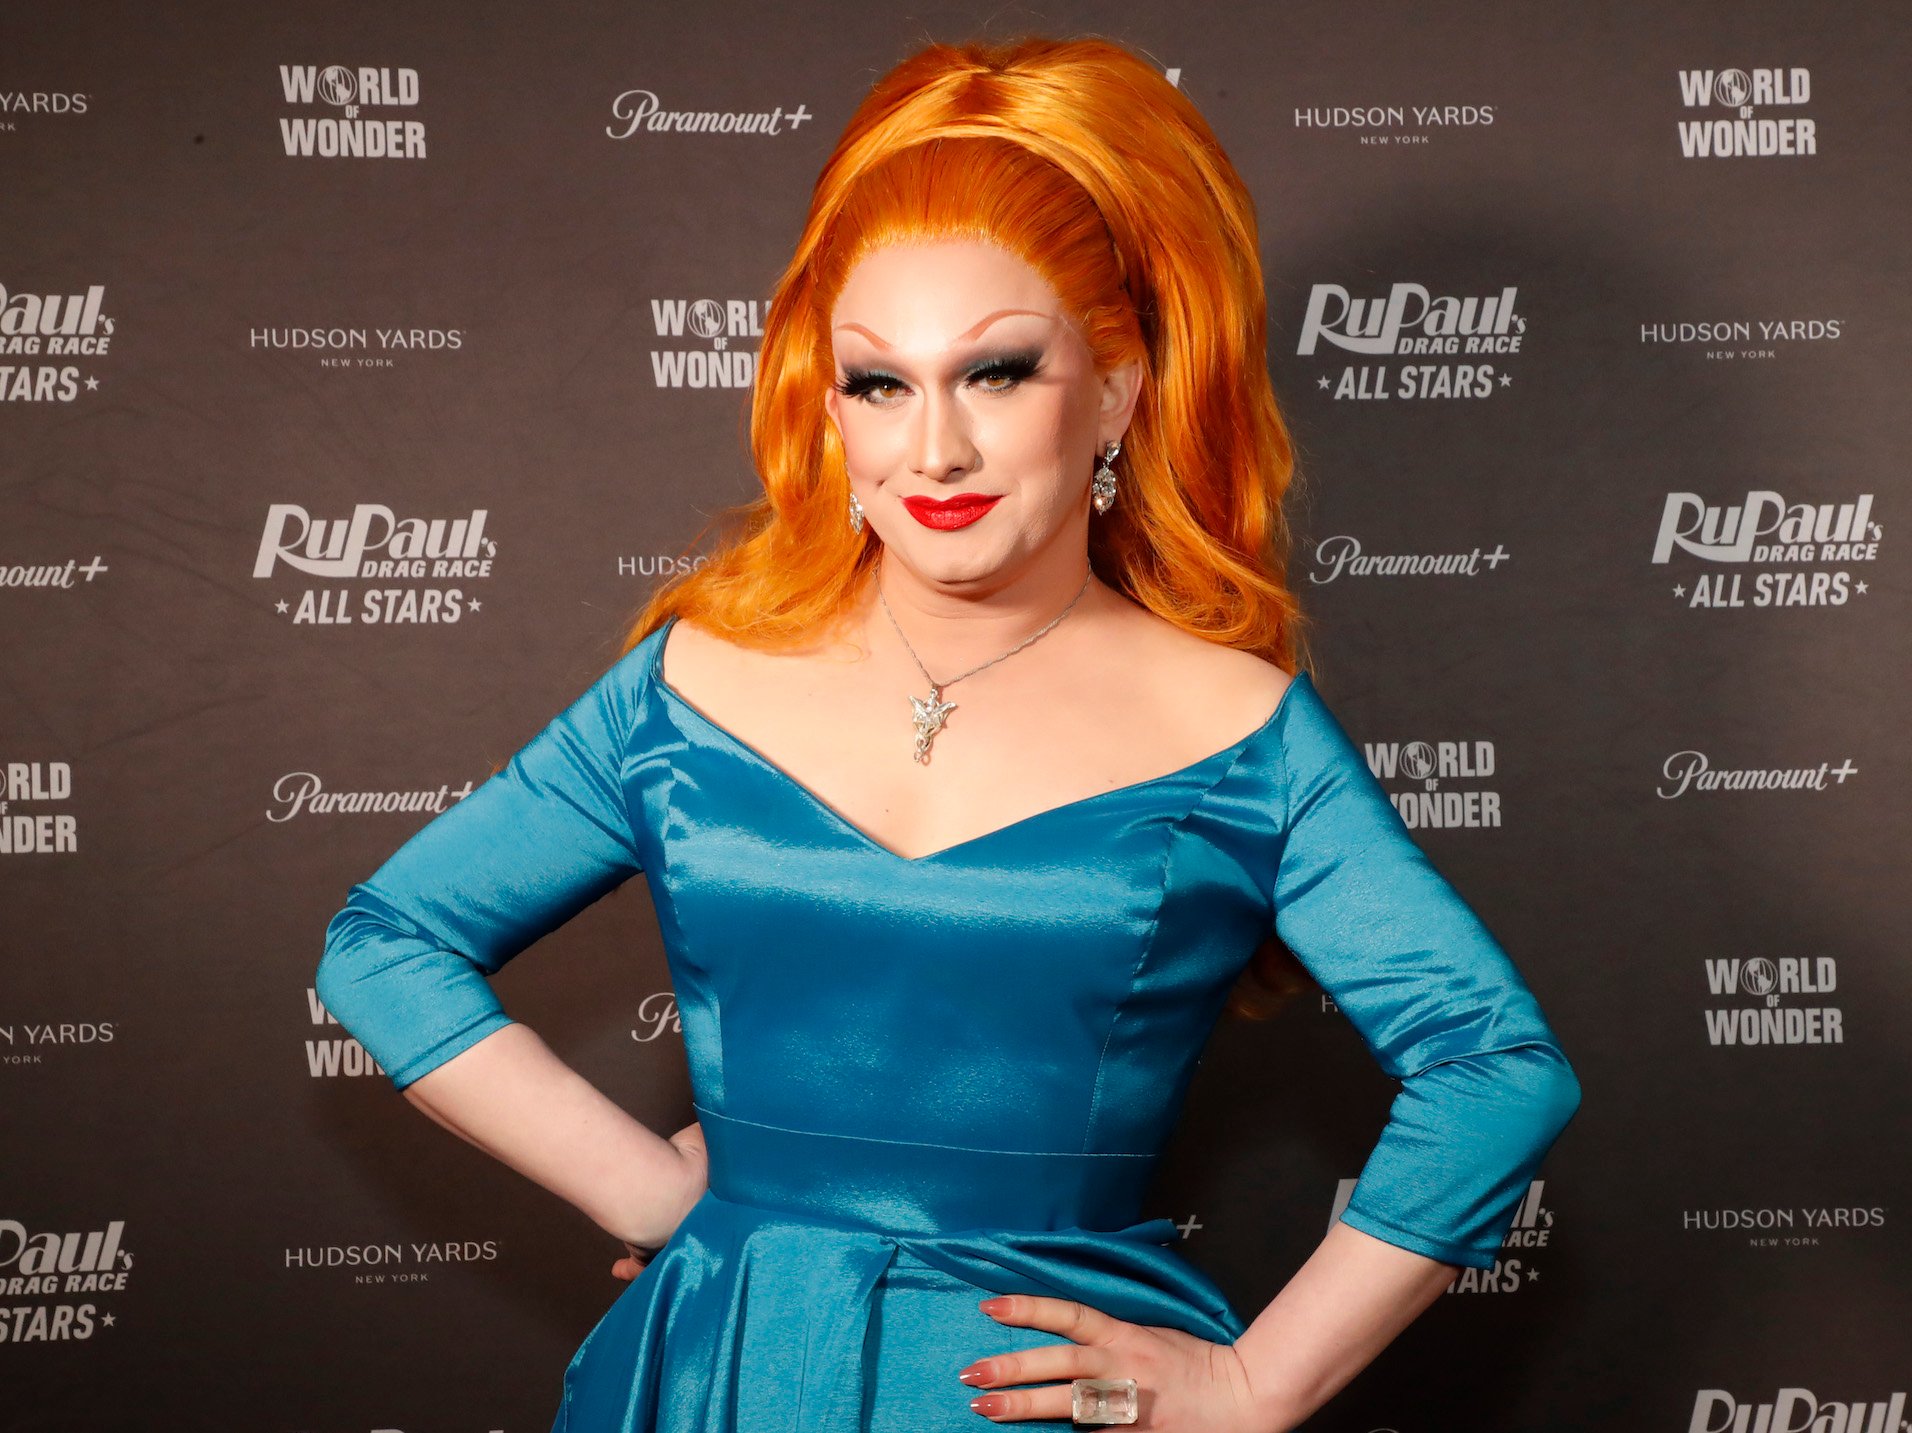 Jinkx Monsoon, who played Judy Garland on 'RuPaul's Drag Race All Stars,' posing for a photo